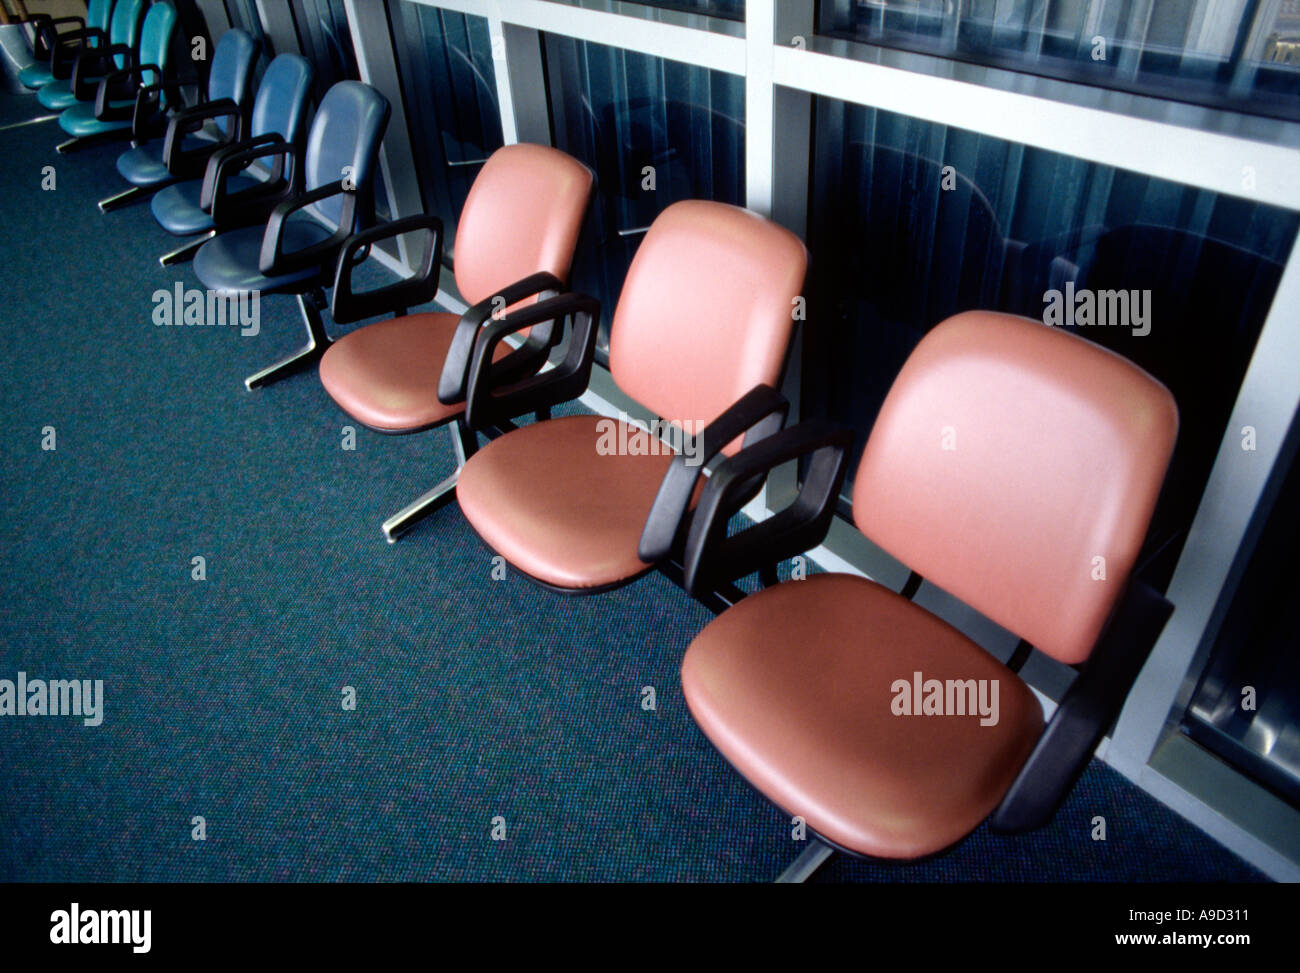 chairs at airport Stock Photo